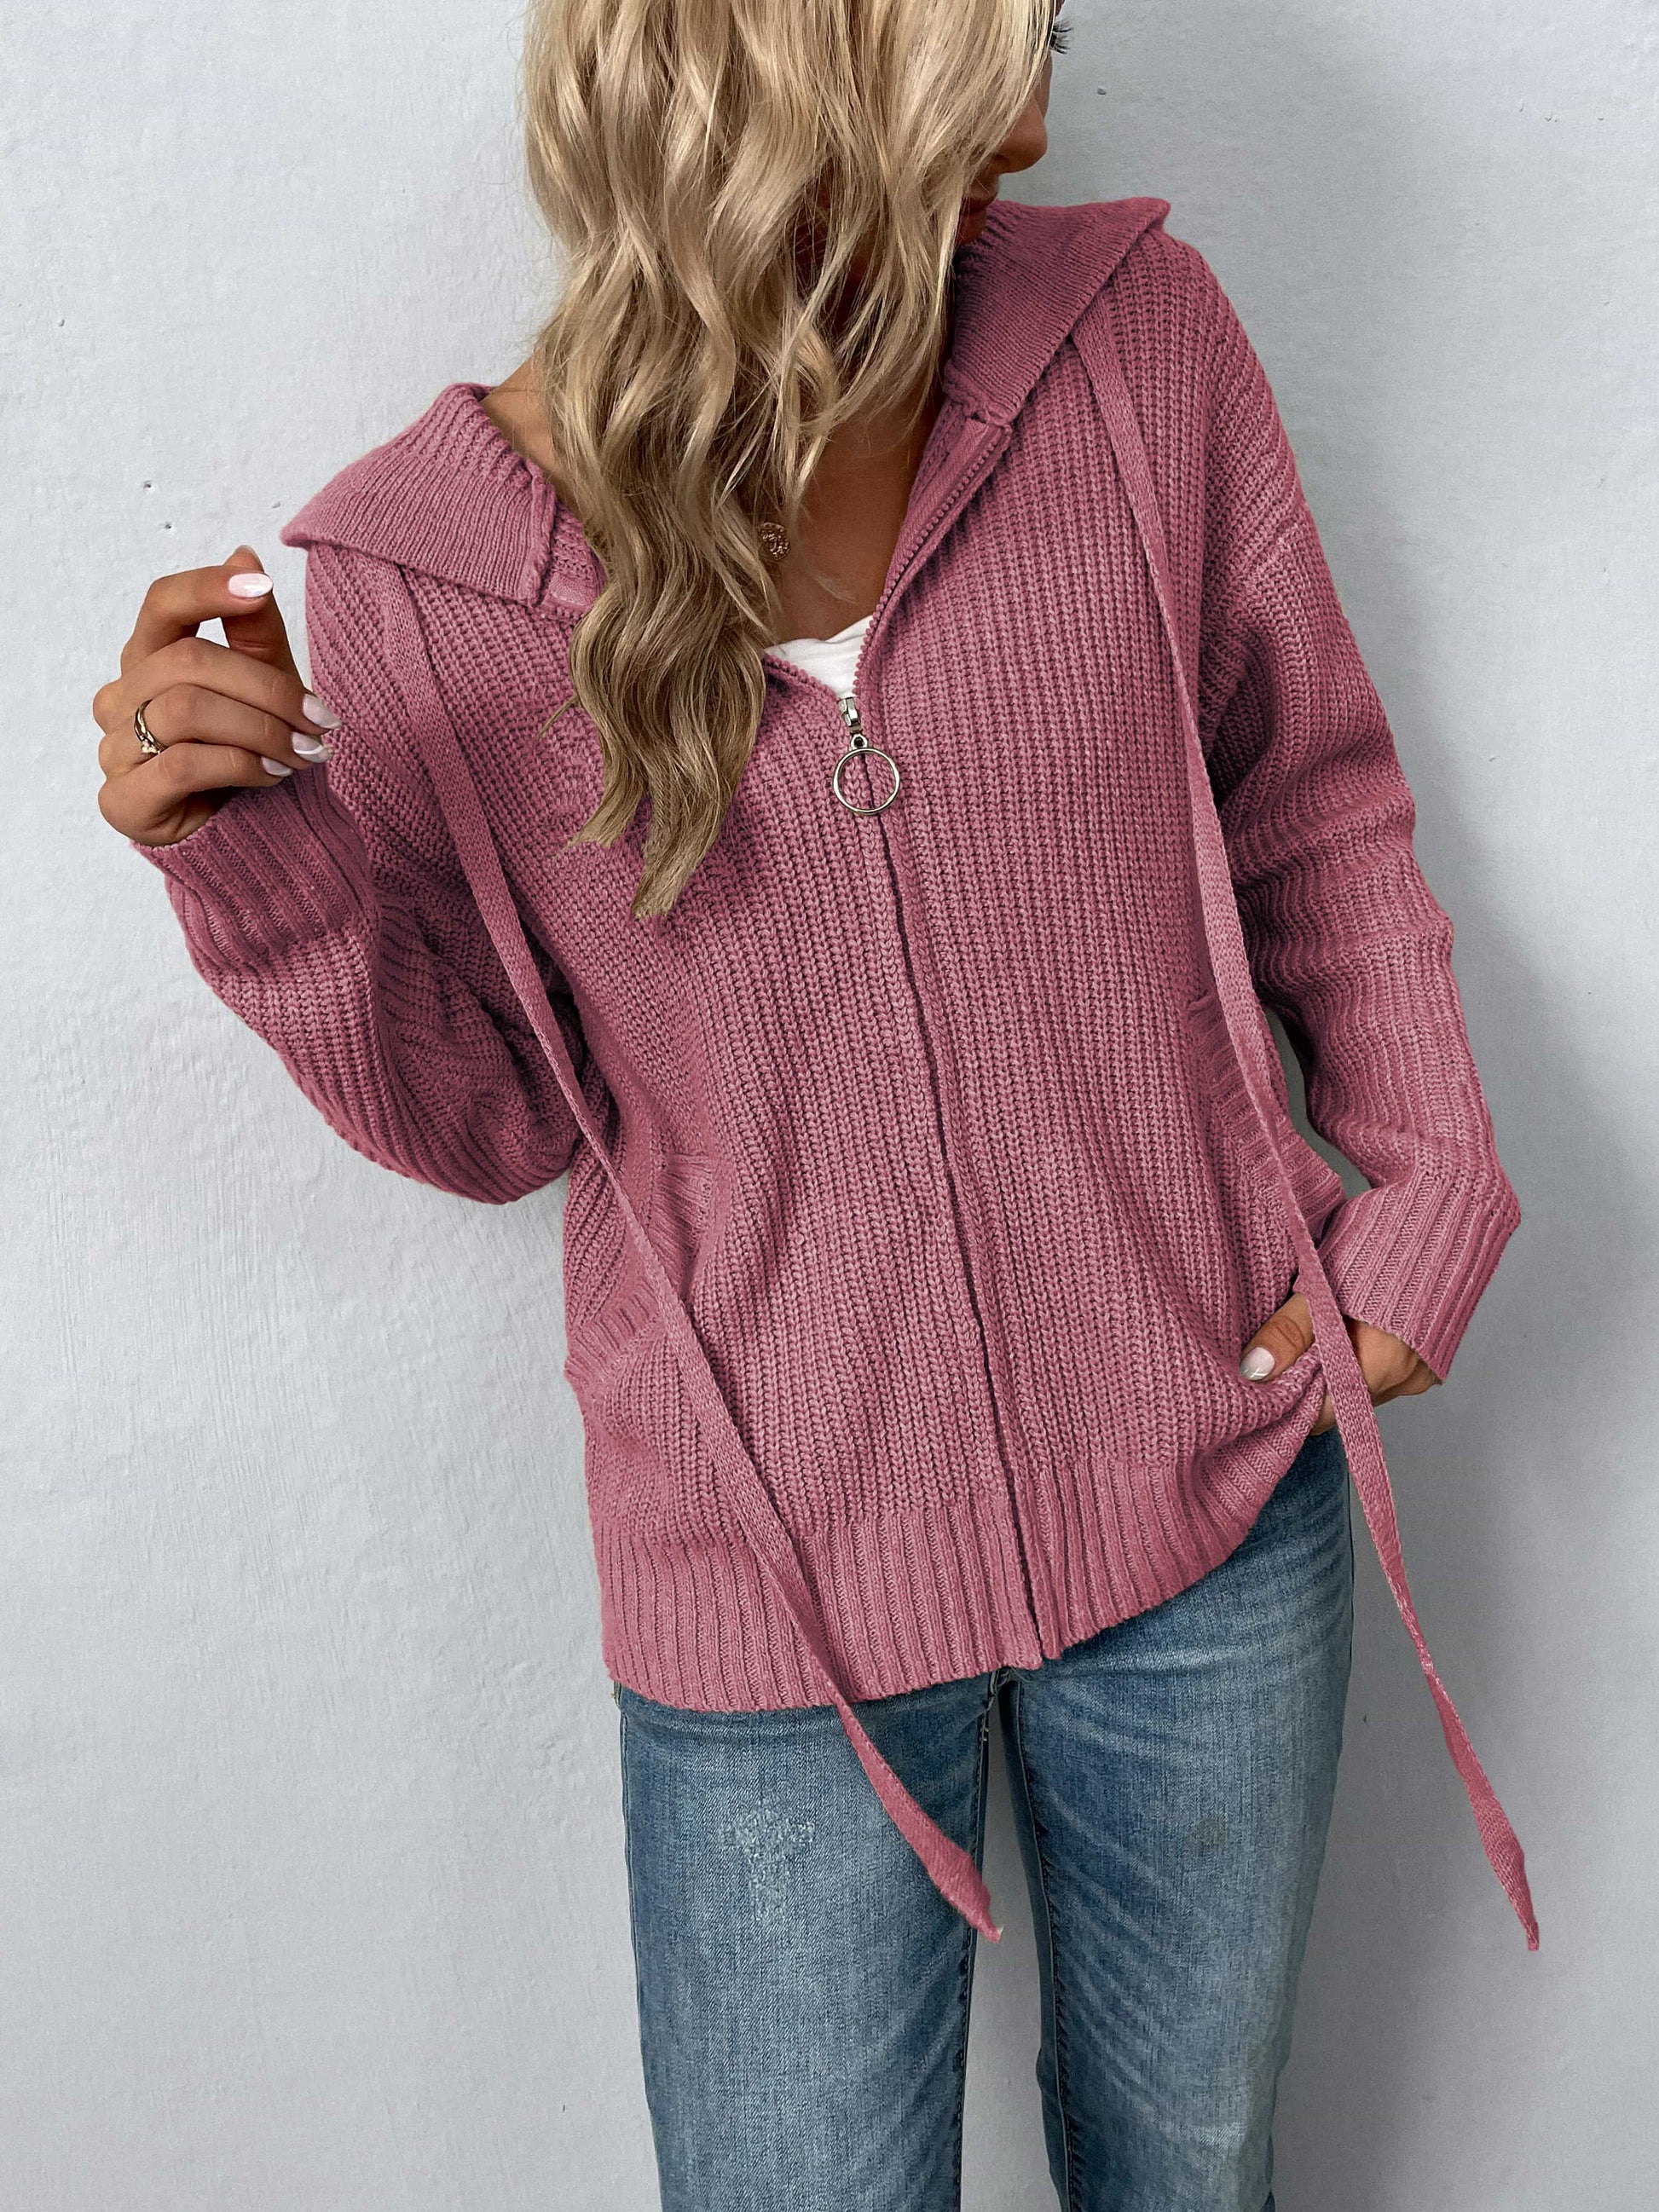 Zip-Up Drawstring Detail Hooded Cardigan - Kawaii Stop - Cardigan, Cardigans, Casual and Chic Style, Drawstring Detail, Drizzle, Everyday Fashion, Hooded Cardigan, Pockets, Ship From Overseas, Solid Color, Women's Clothing